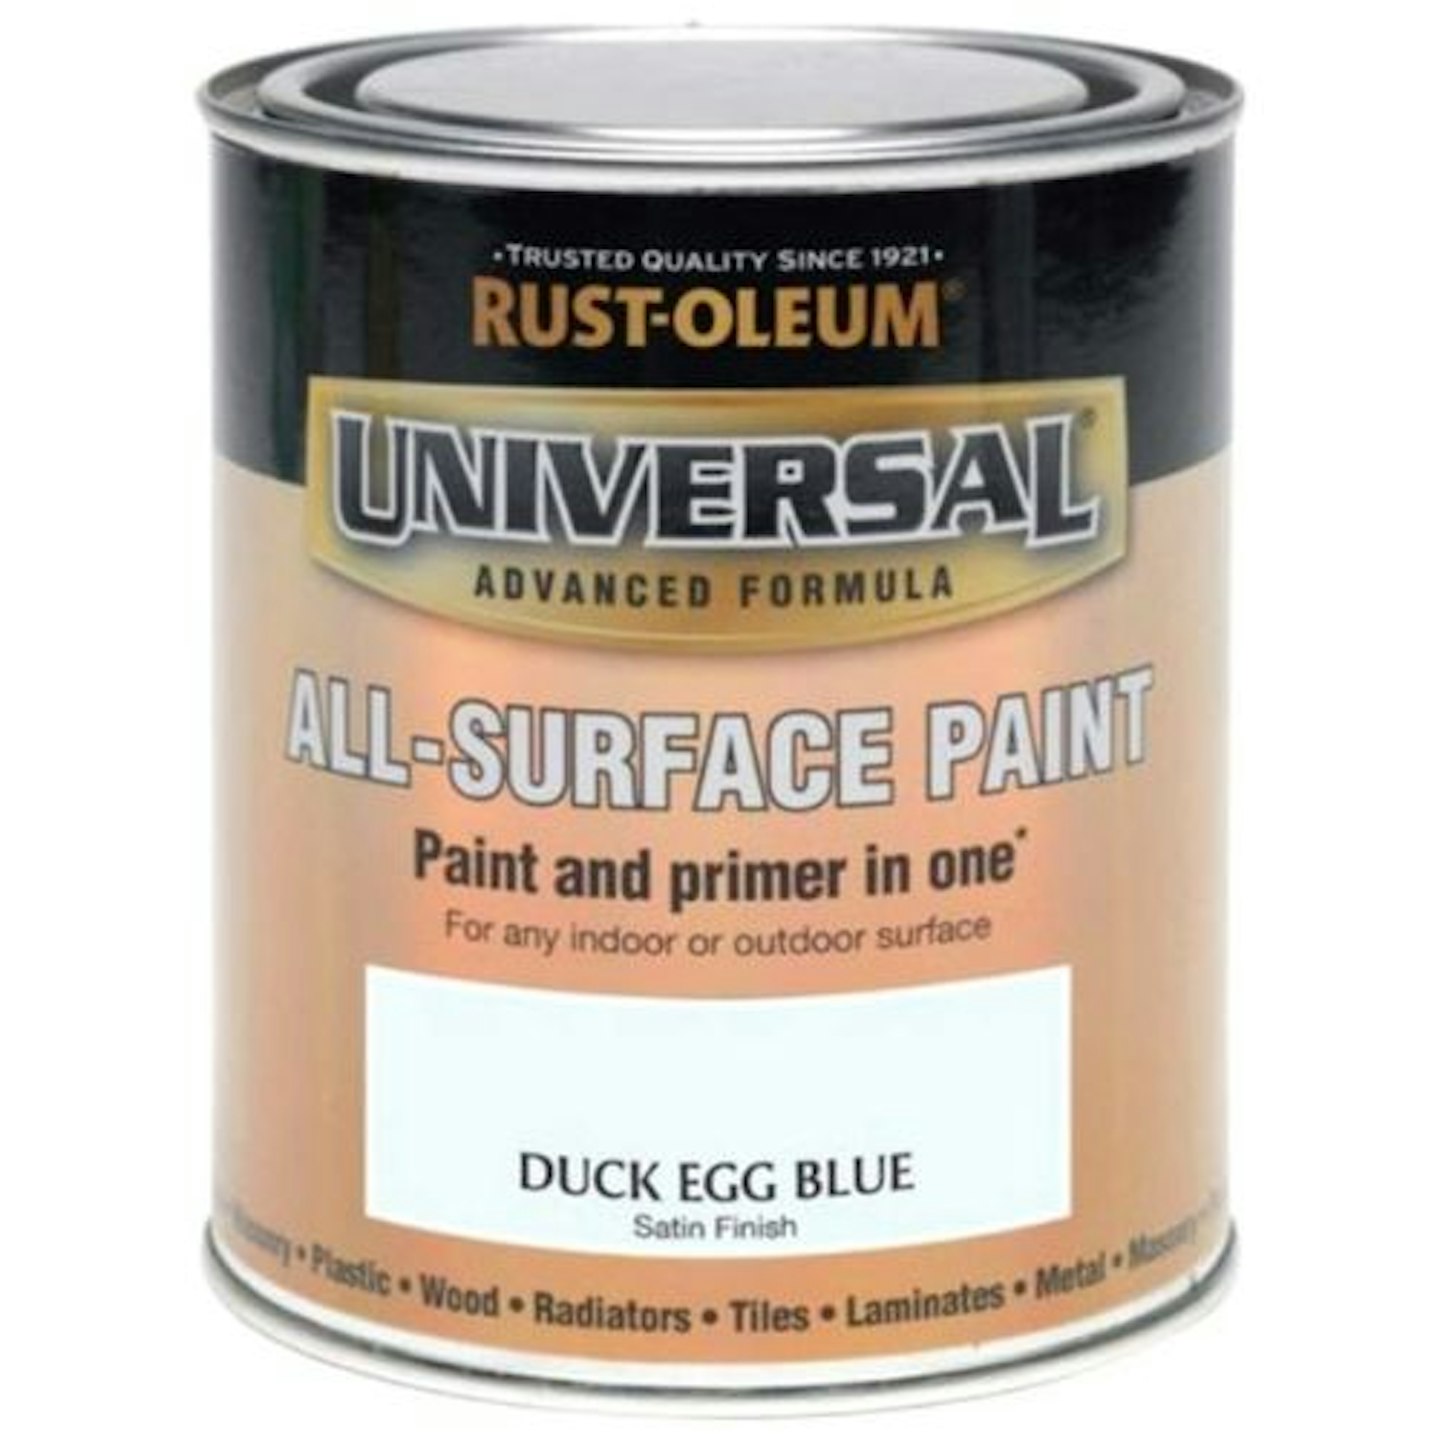 Rust-Oleum Universal All-Surface Brush-on Paint in Duck Egg Blue